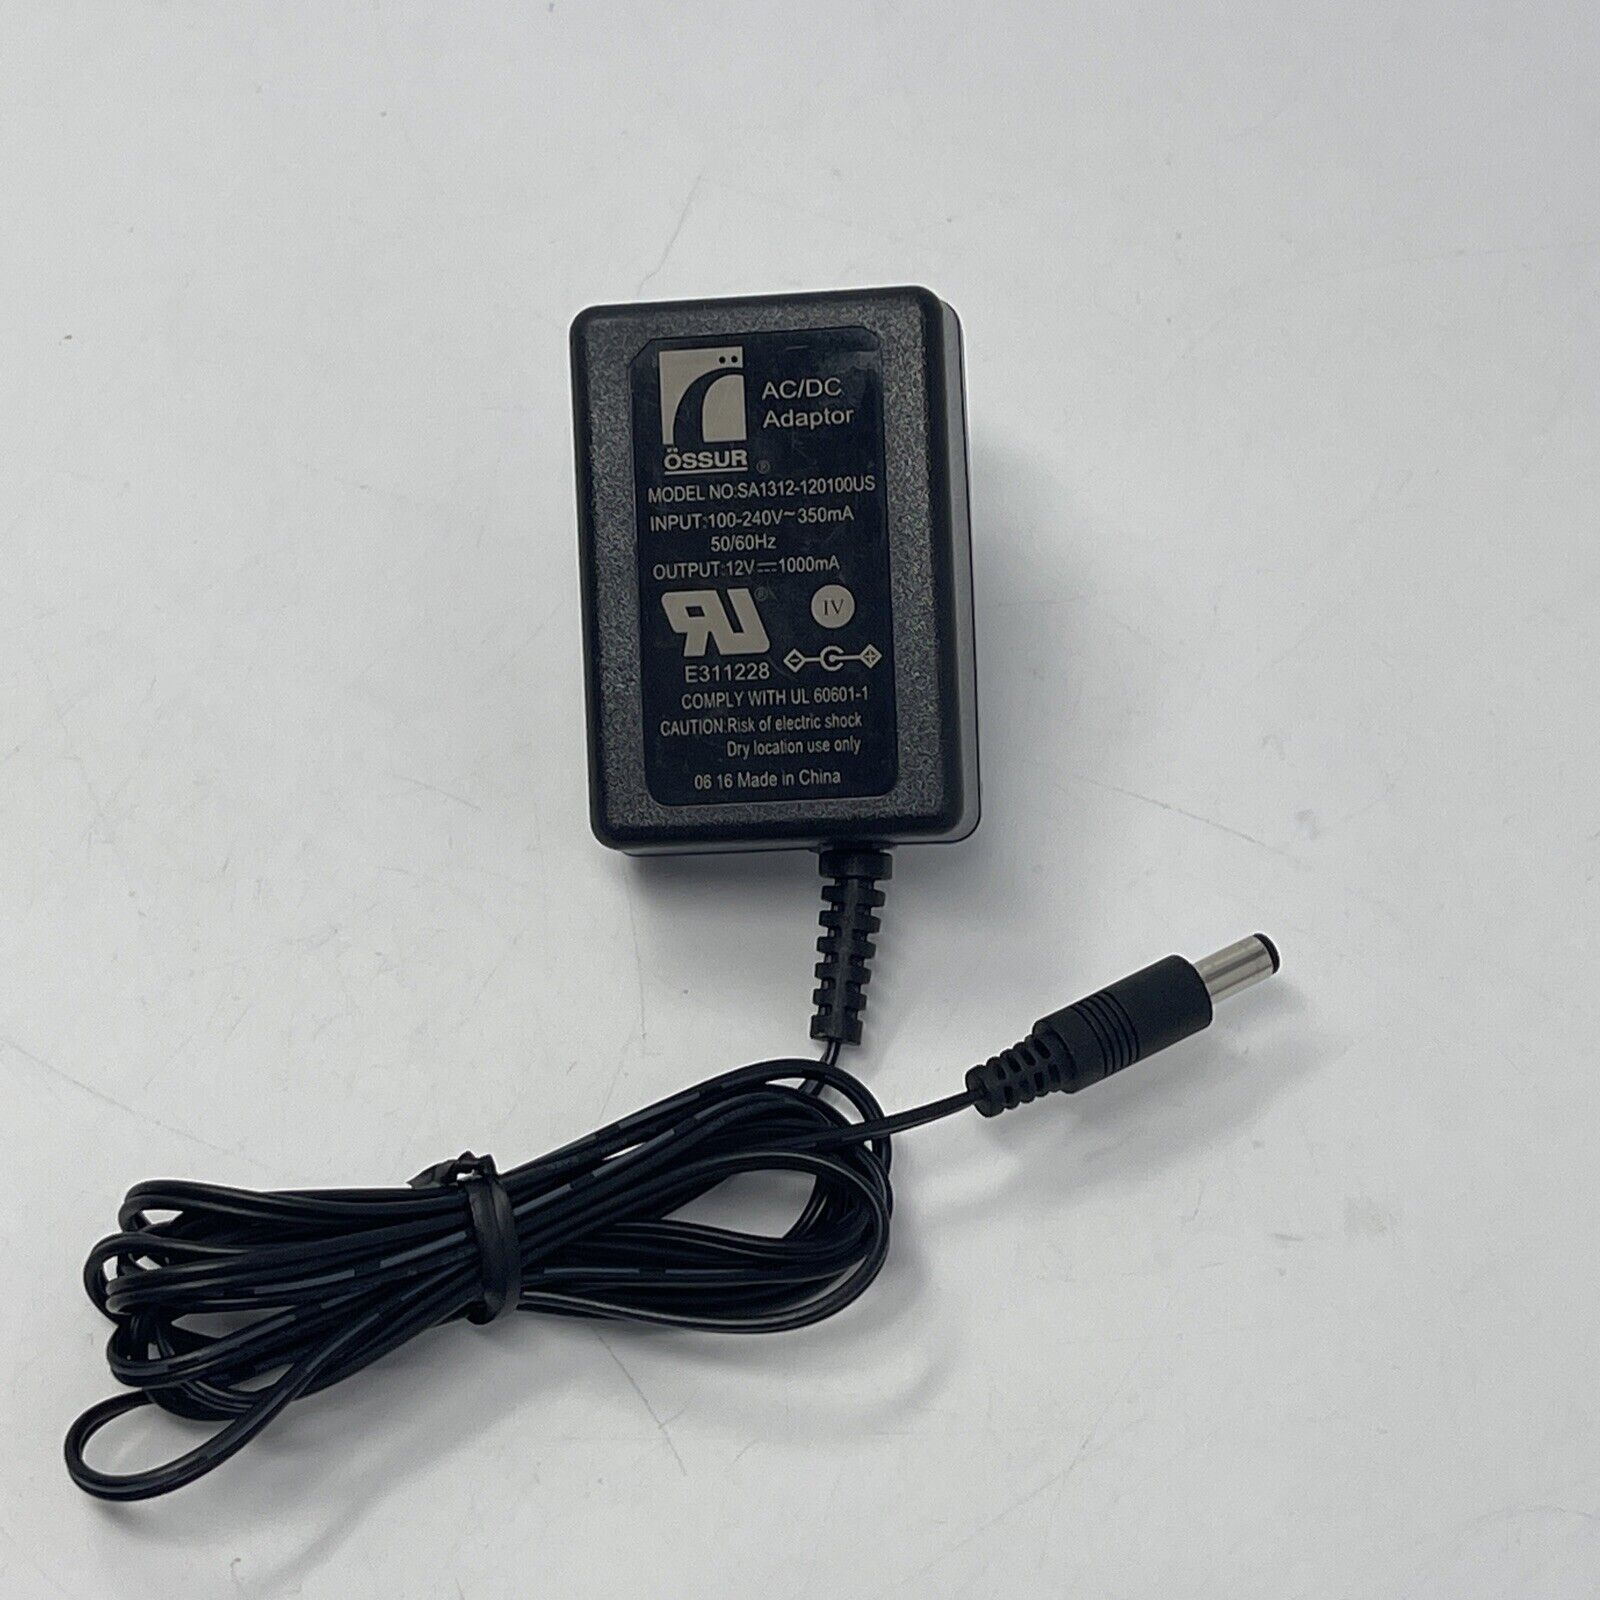 Ossur AC Adapter Power Supply SA1312-120100US 12V 1000mA Össur Charger Cable Brand: Ossur Type: AC/DC Adapter Conn - Click Image to Close